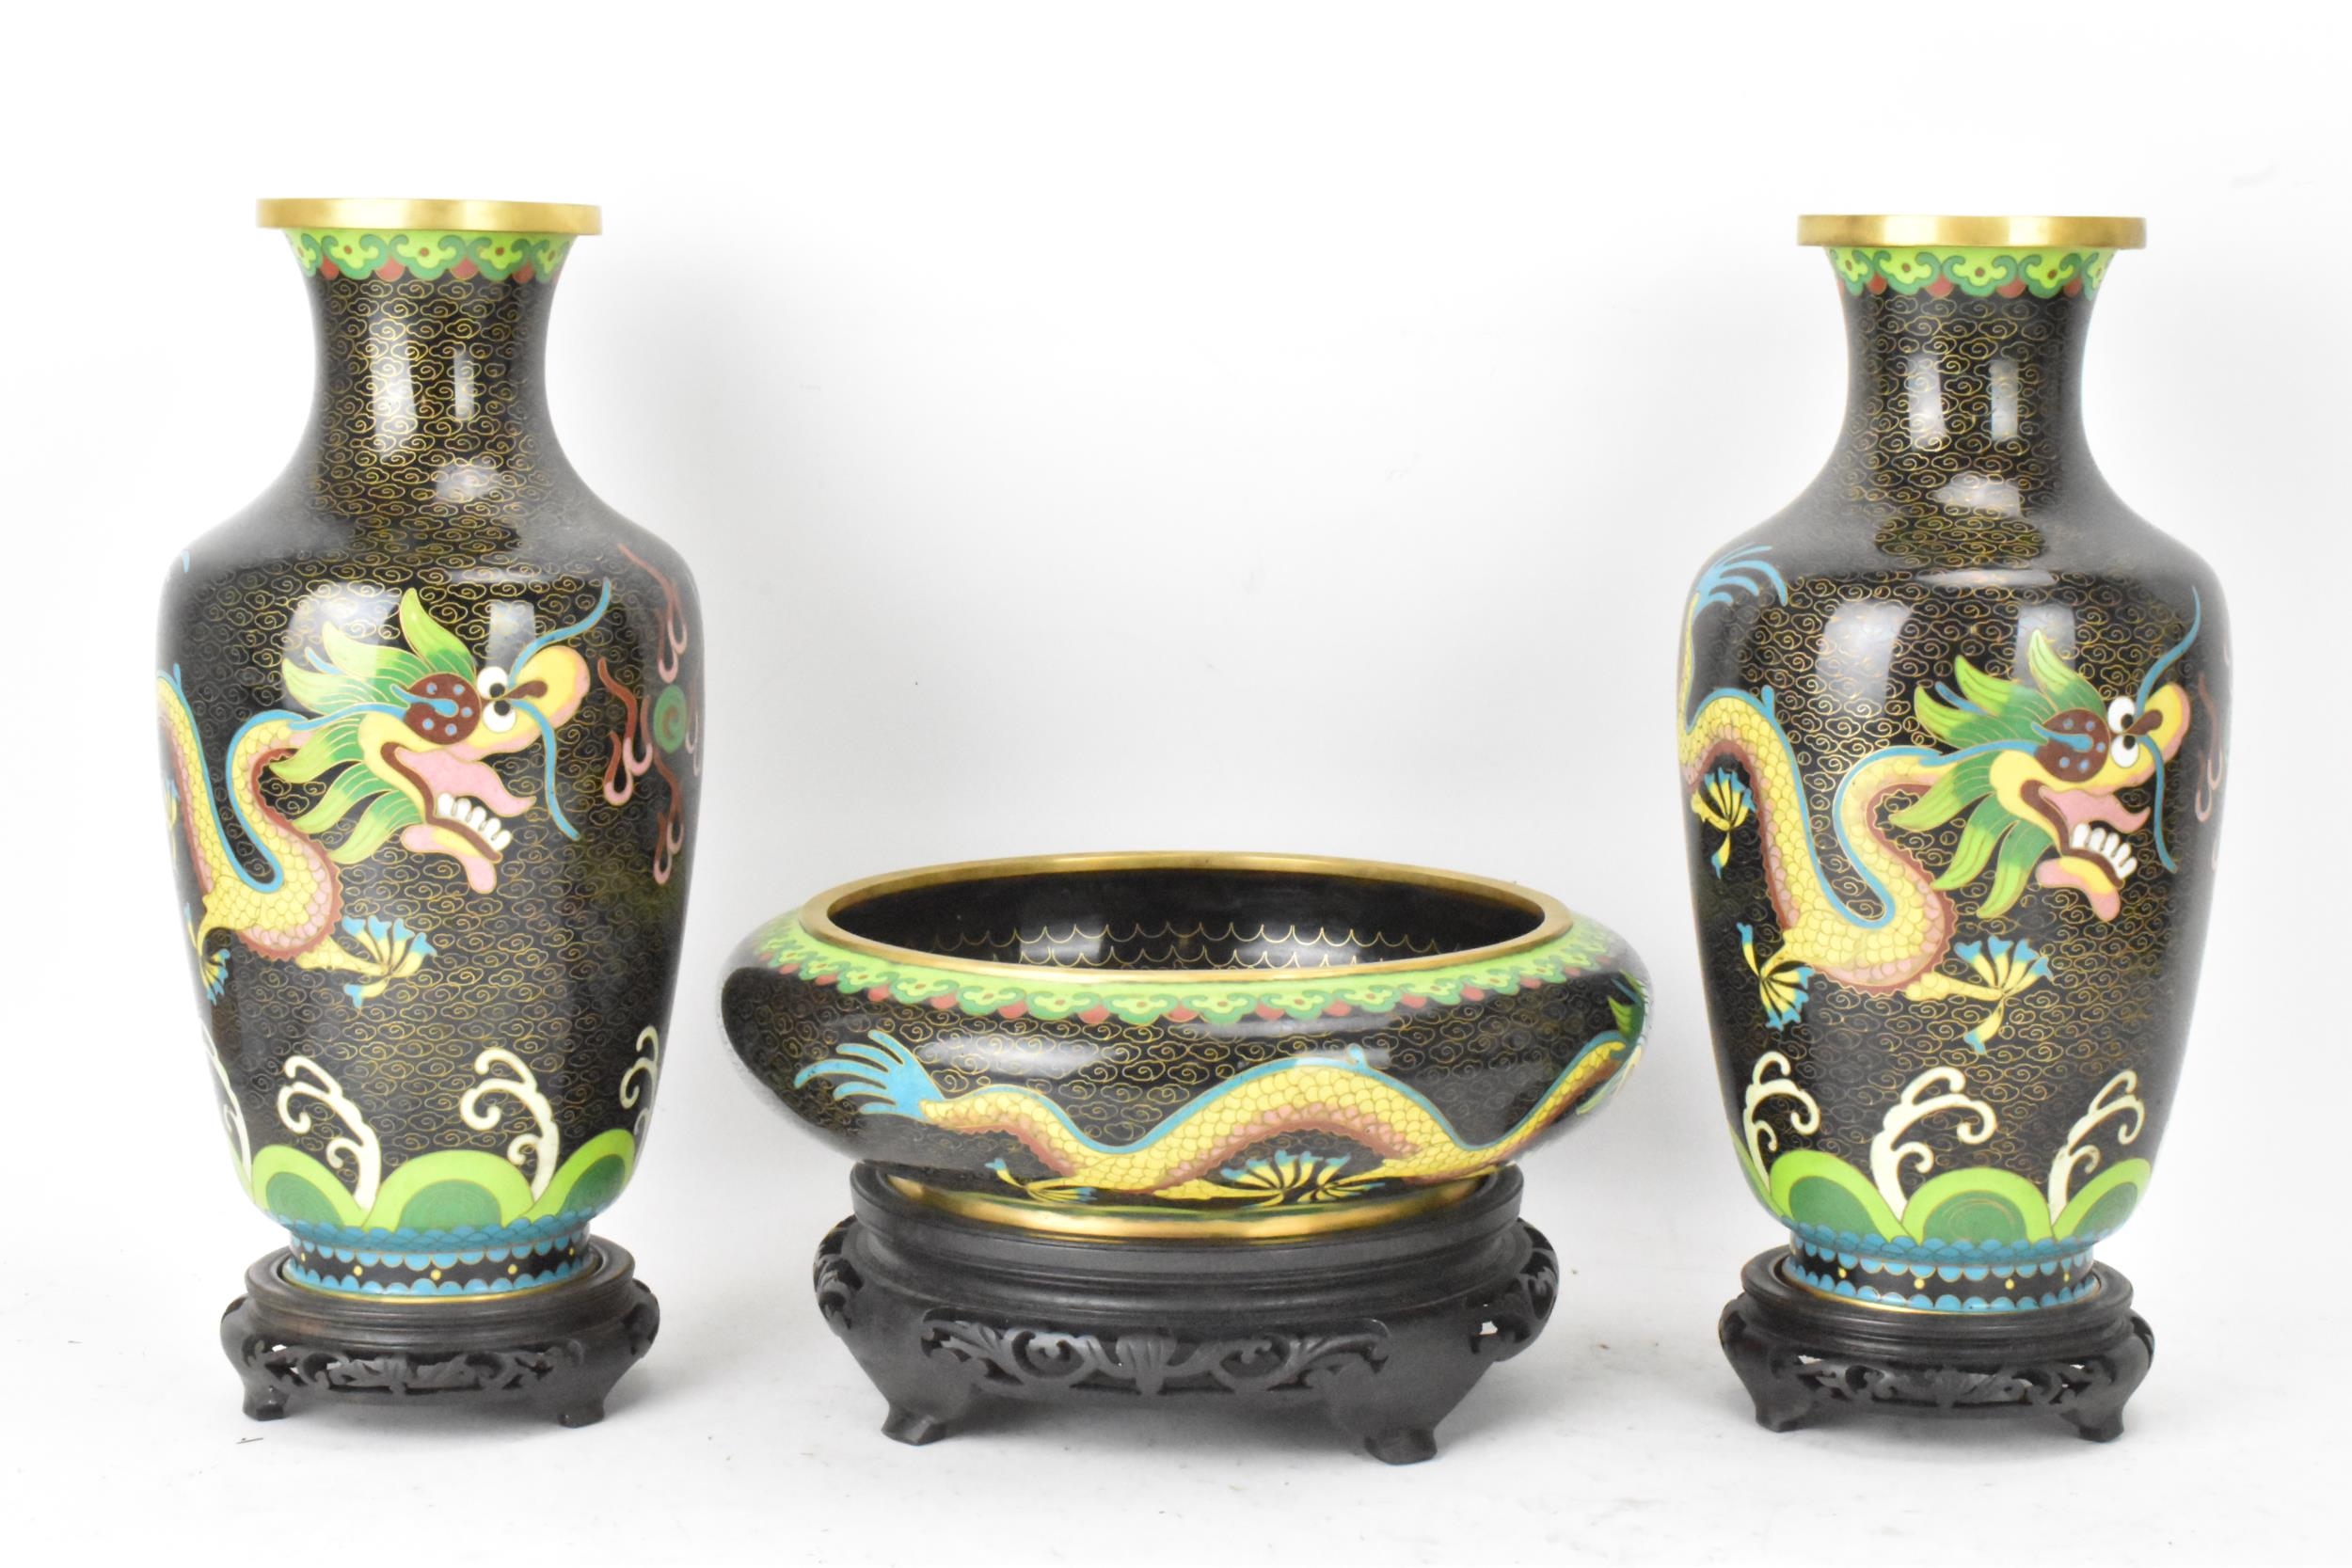 A pair of Chinese mid 20th century cloisonne vases and a bowl, all with black grounds decorated with